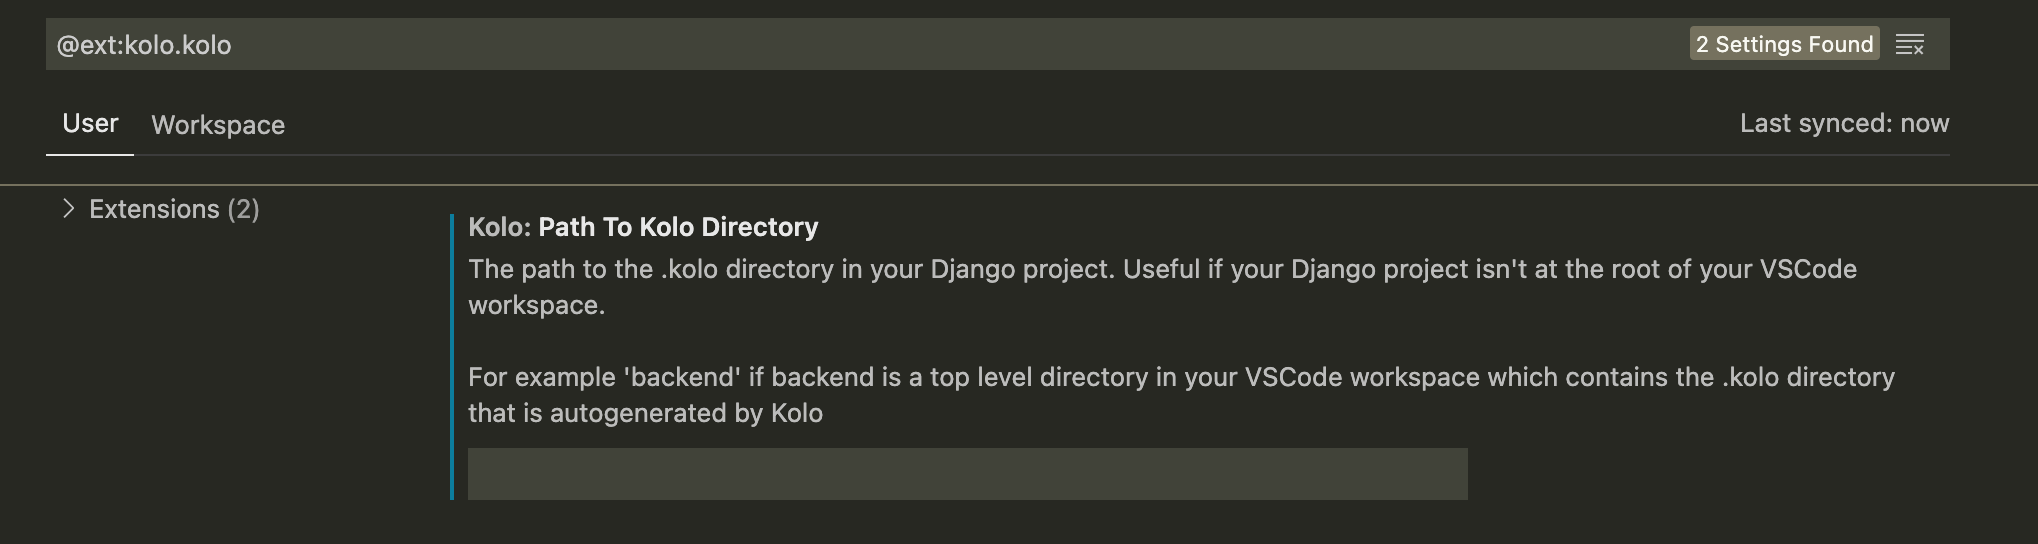 Configuring the Path to Kolo Directory in VSCode